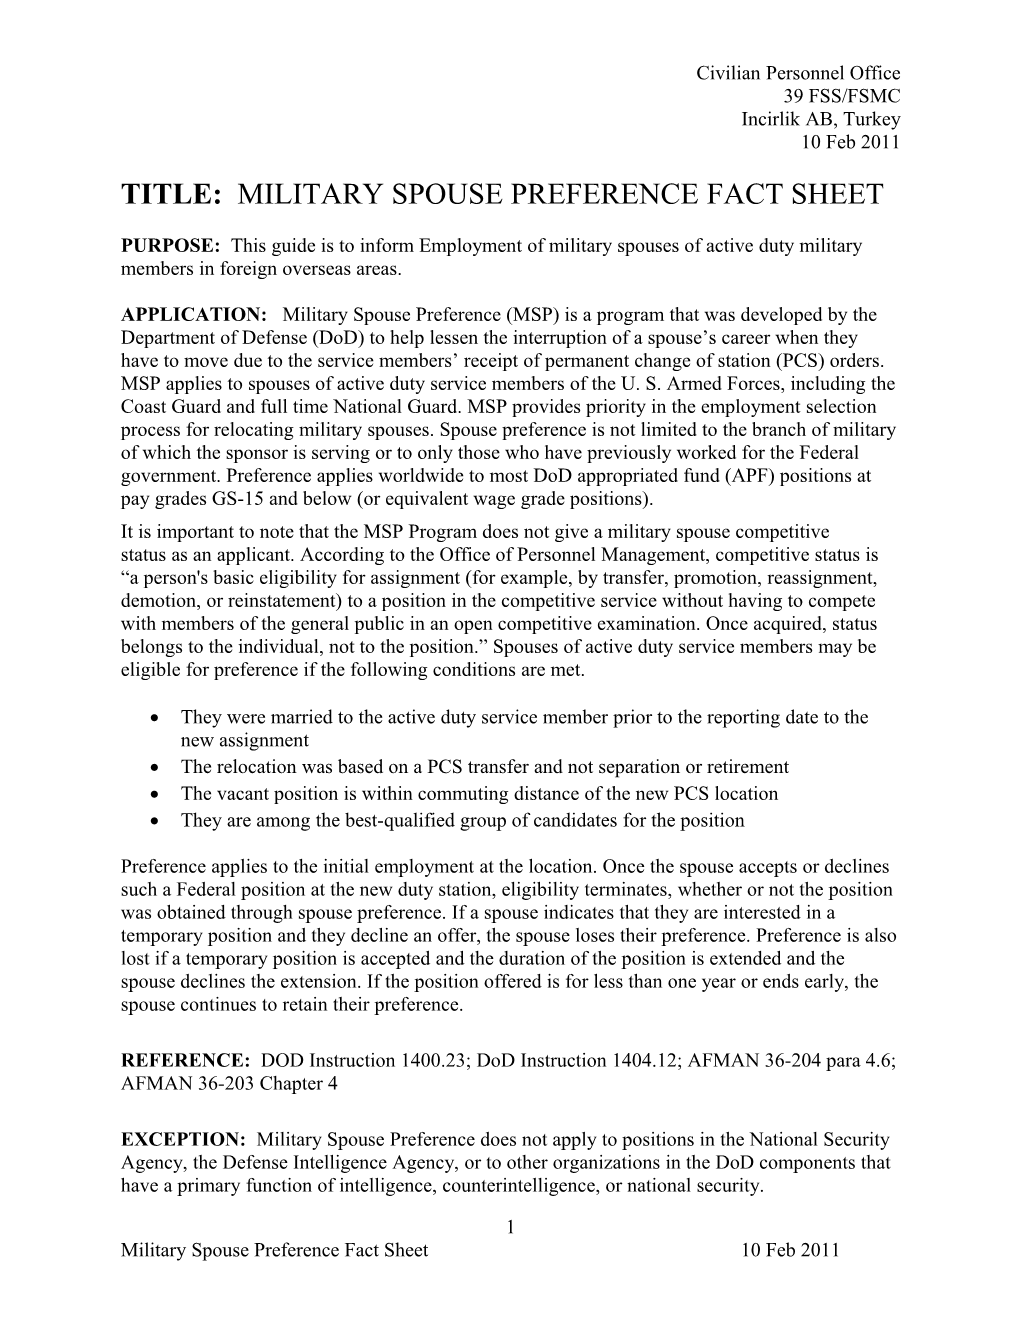 Title: Military Spouse Preference Fact Sheet